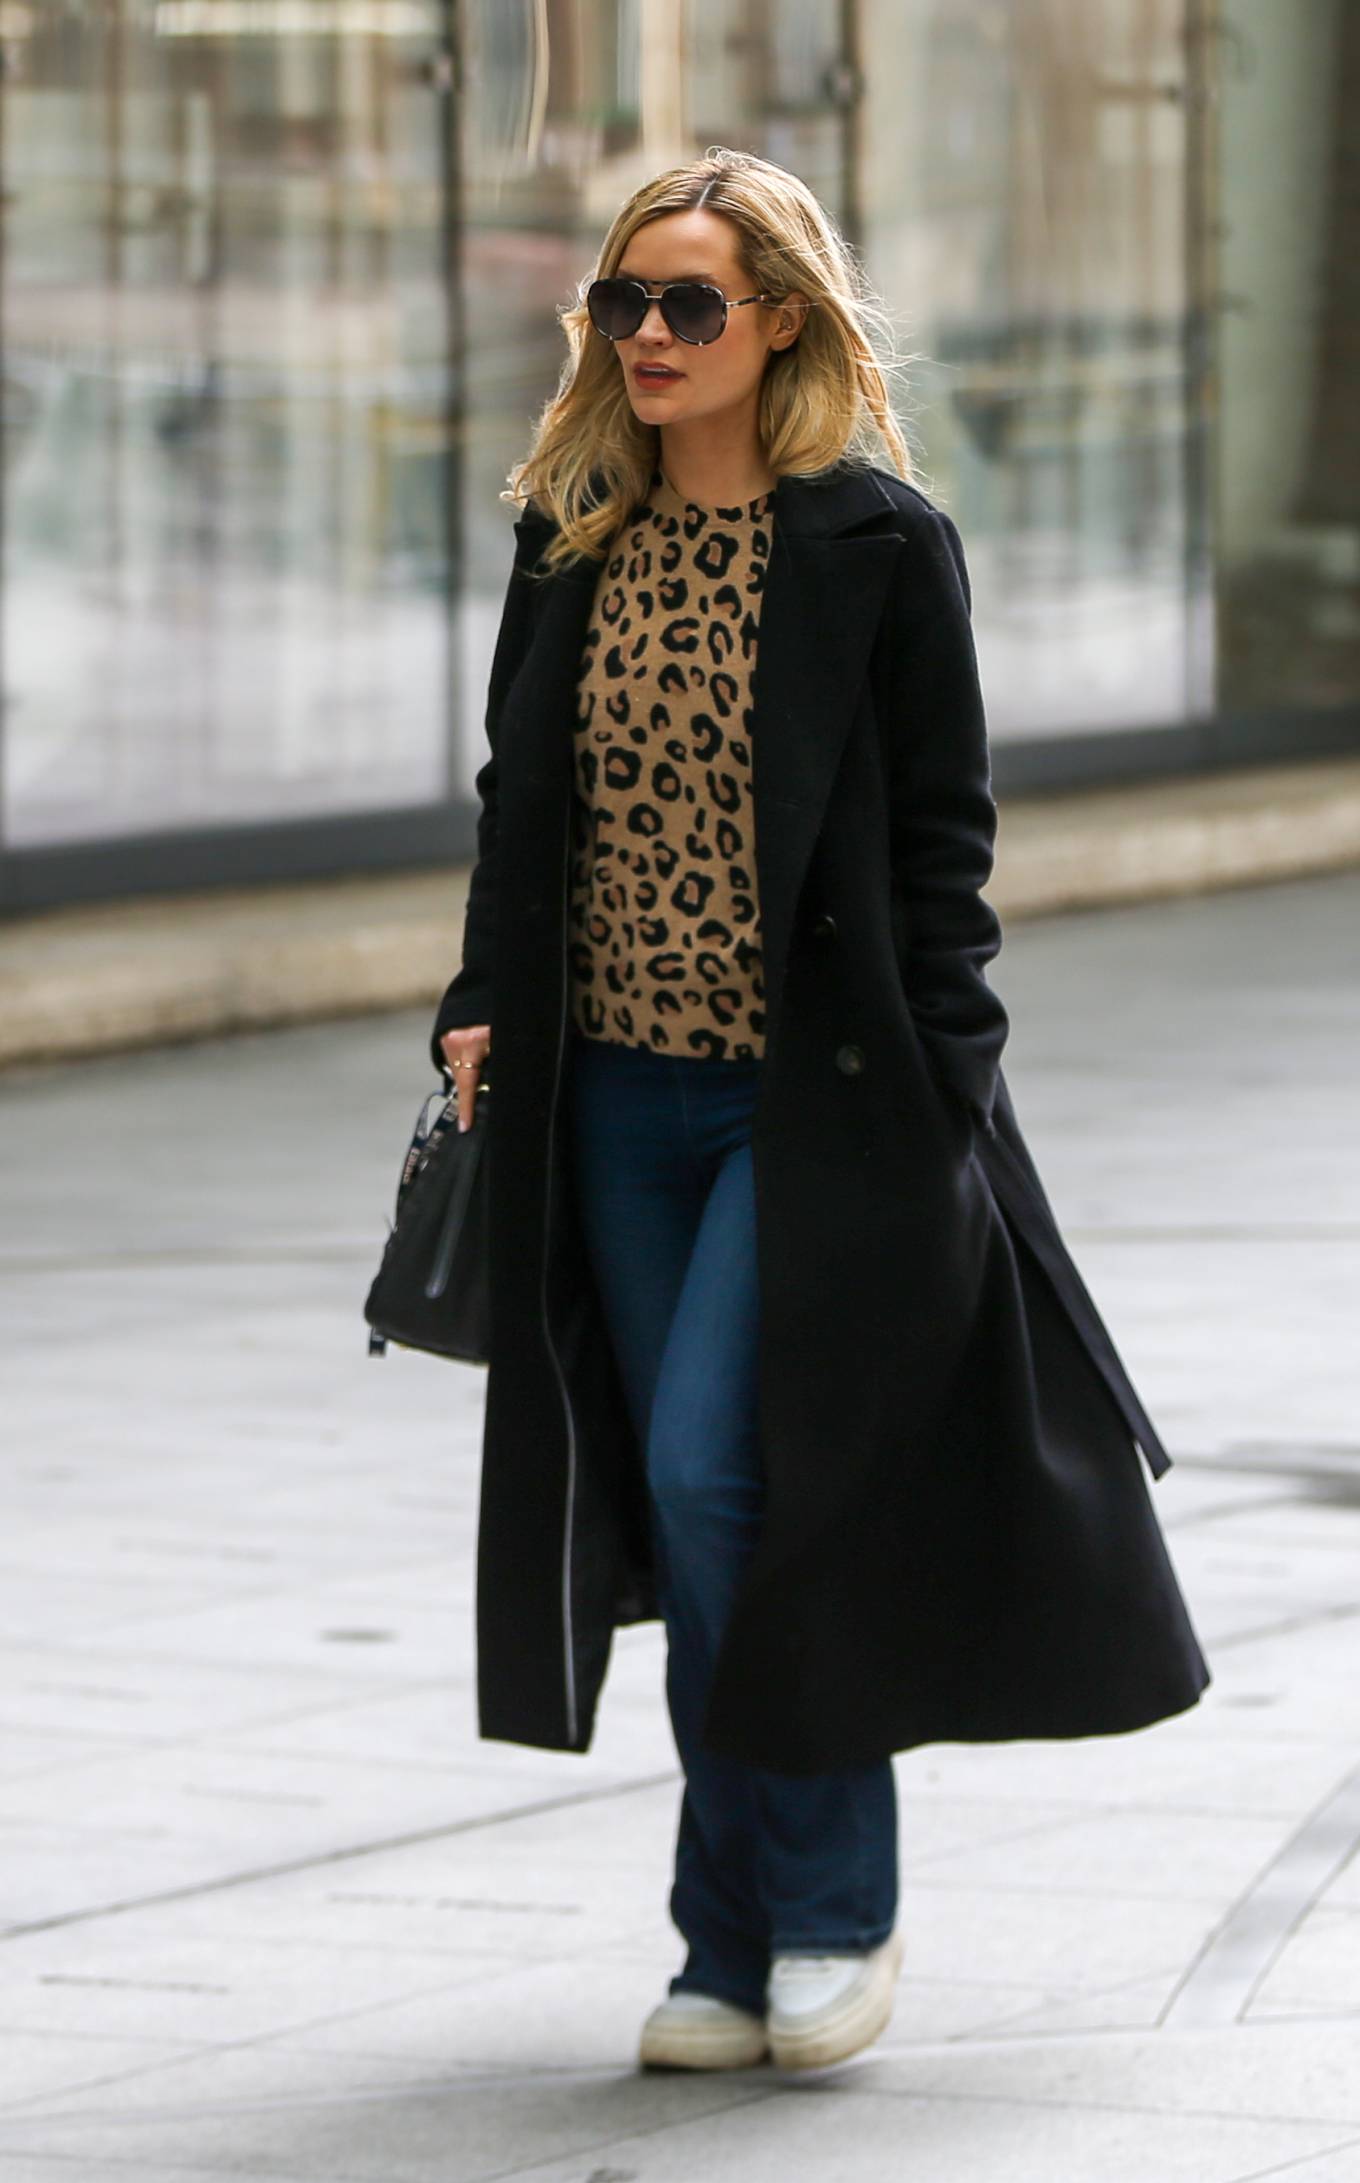 Laura Whitmore - Pictured outside BBC New Broadcasting House in London